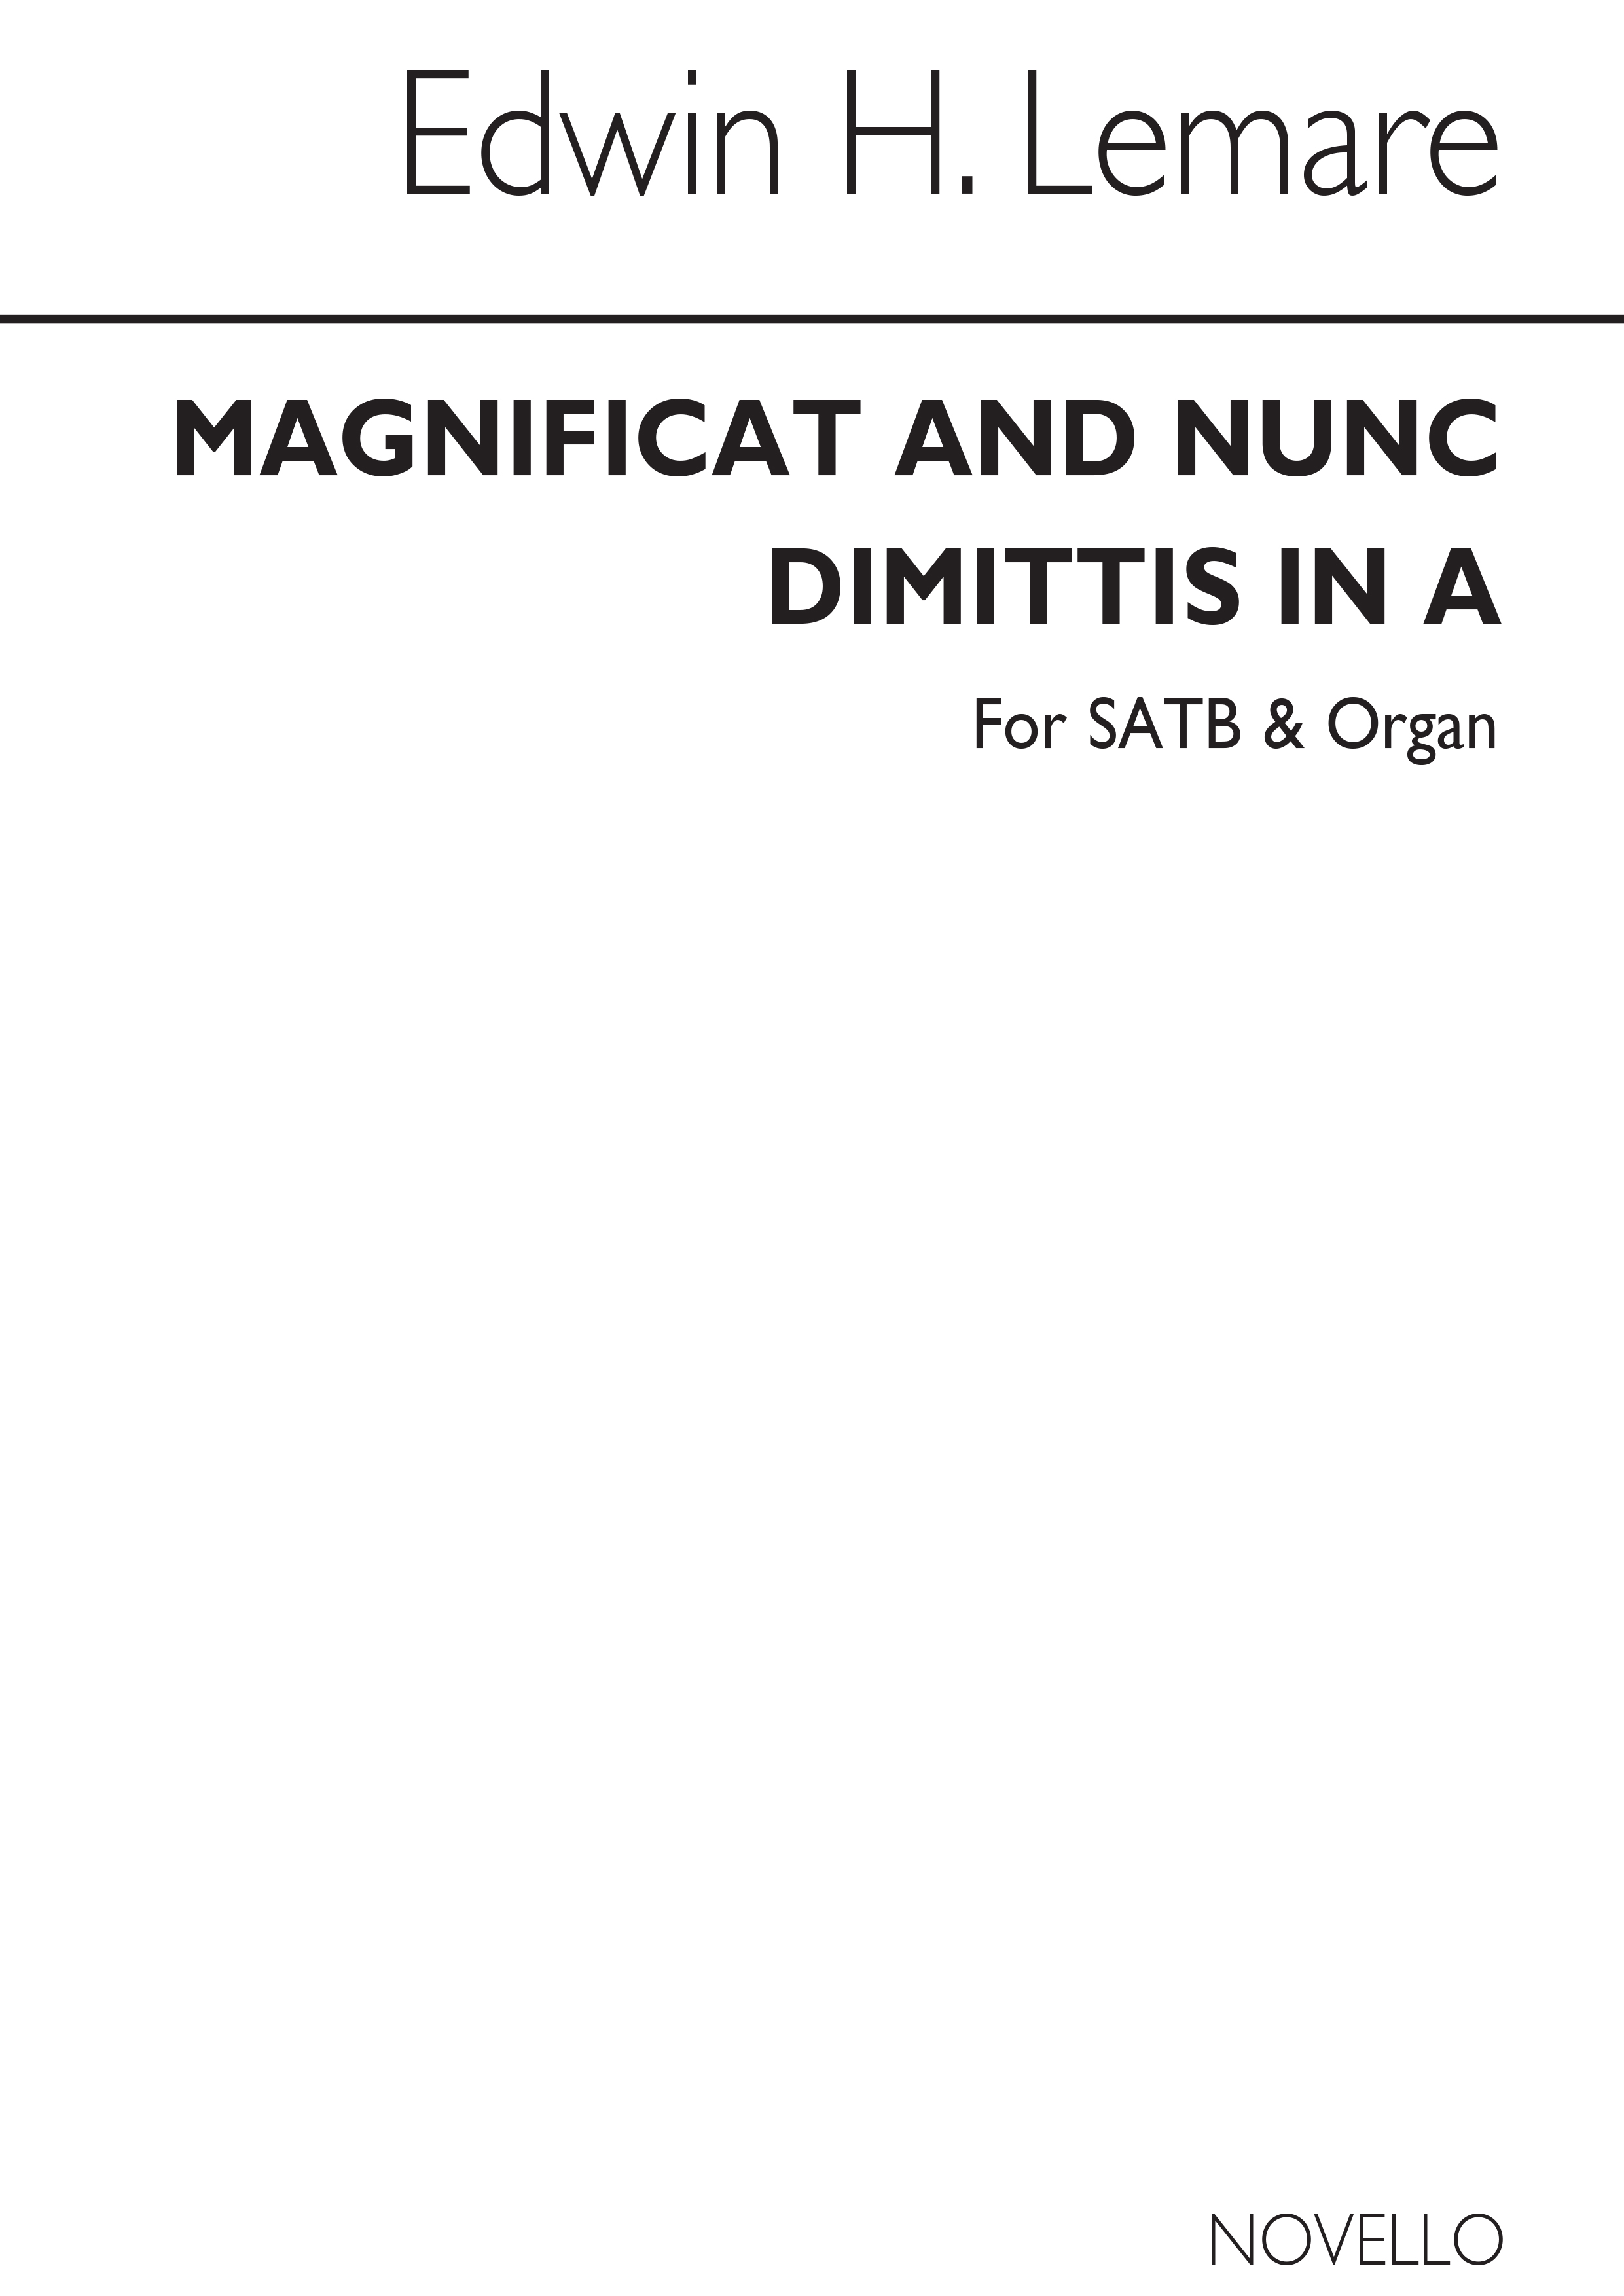 Edwin Lemare: Magnificat And Nunc Dimittis In A